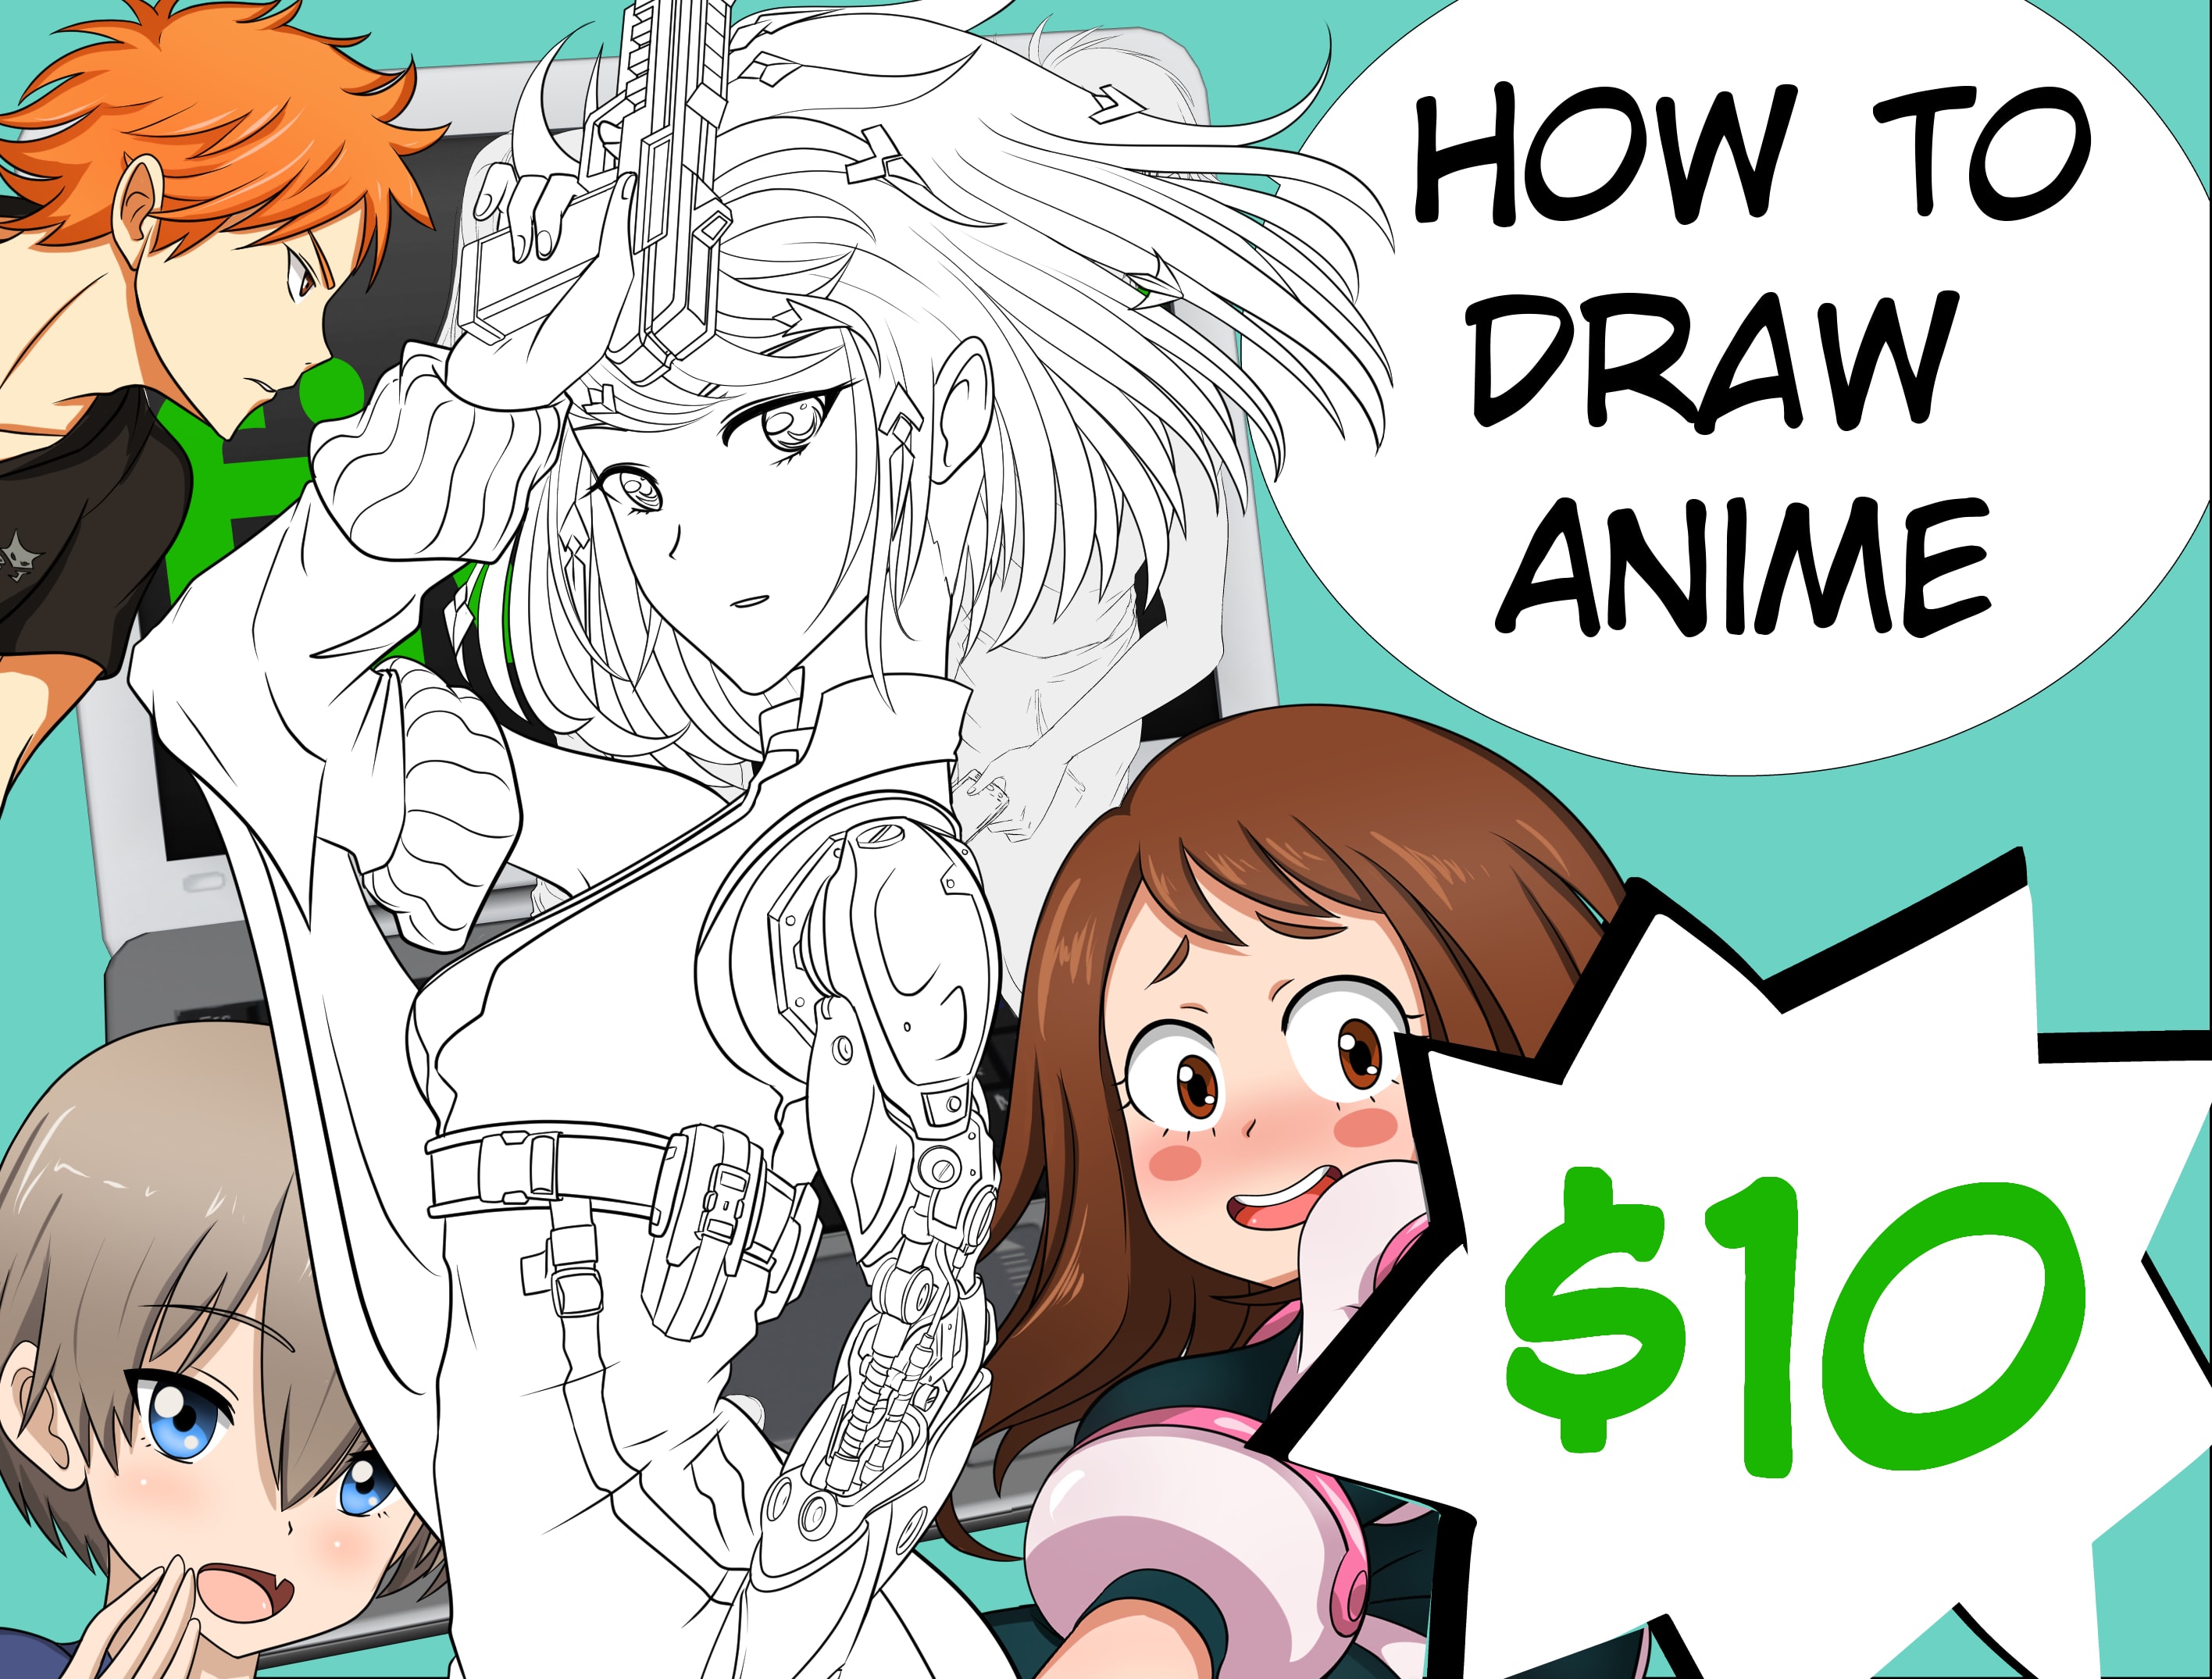 Teach you how to draw anime online by Joesketch | Fiverr